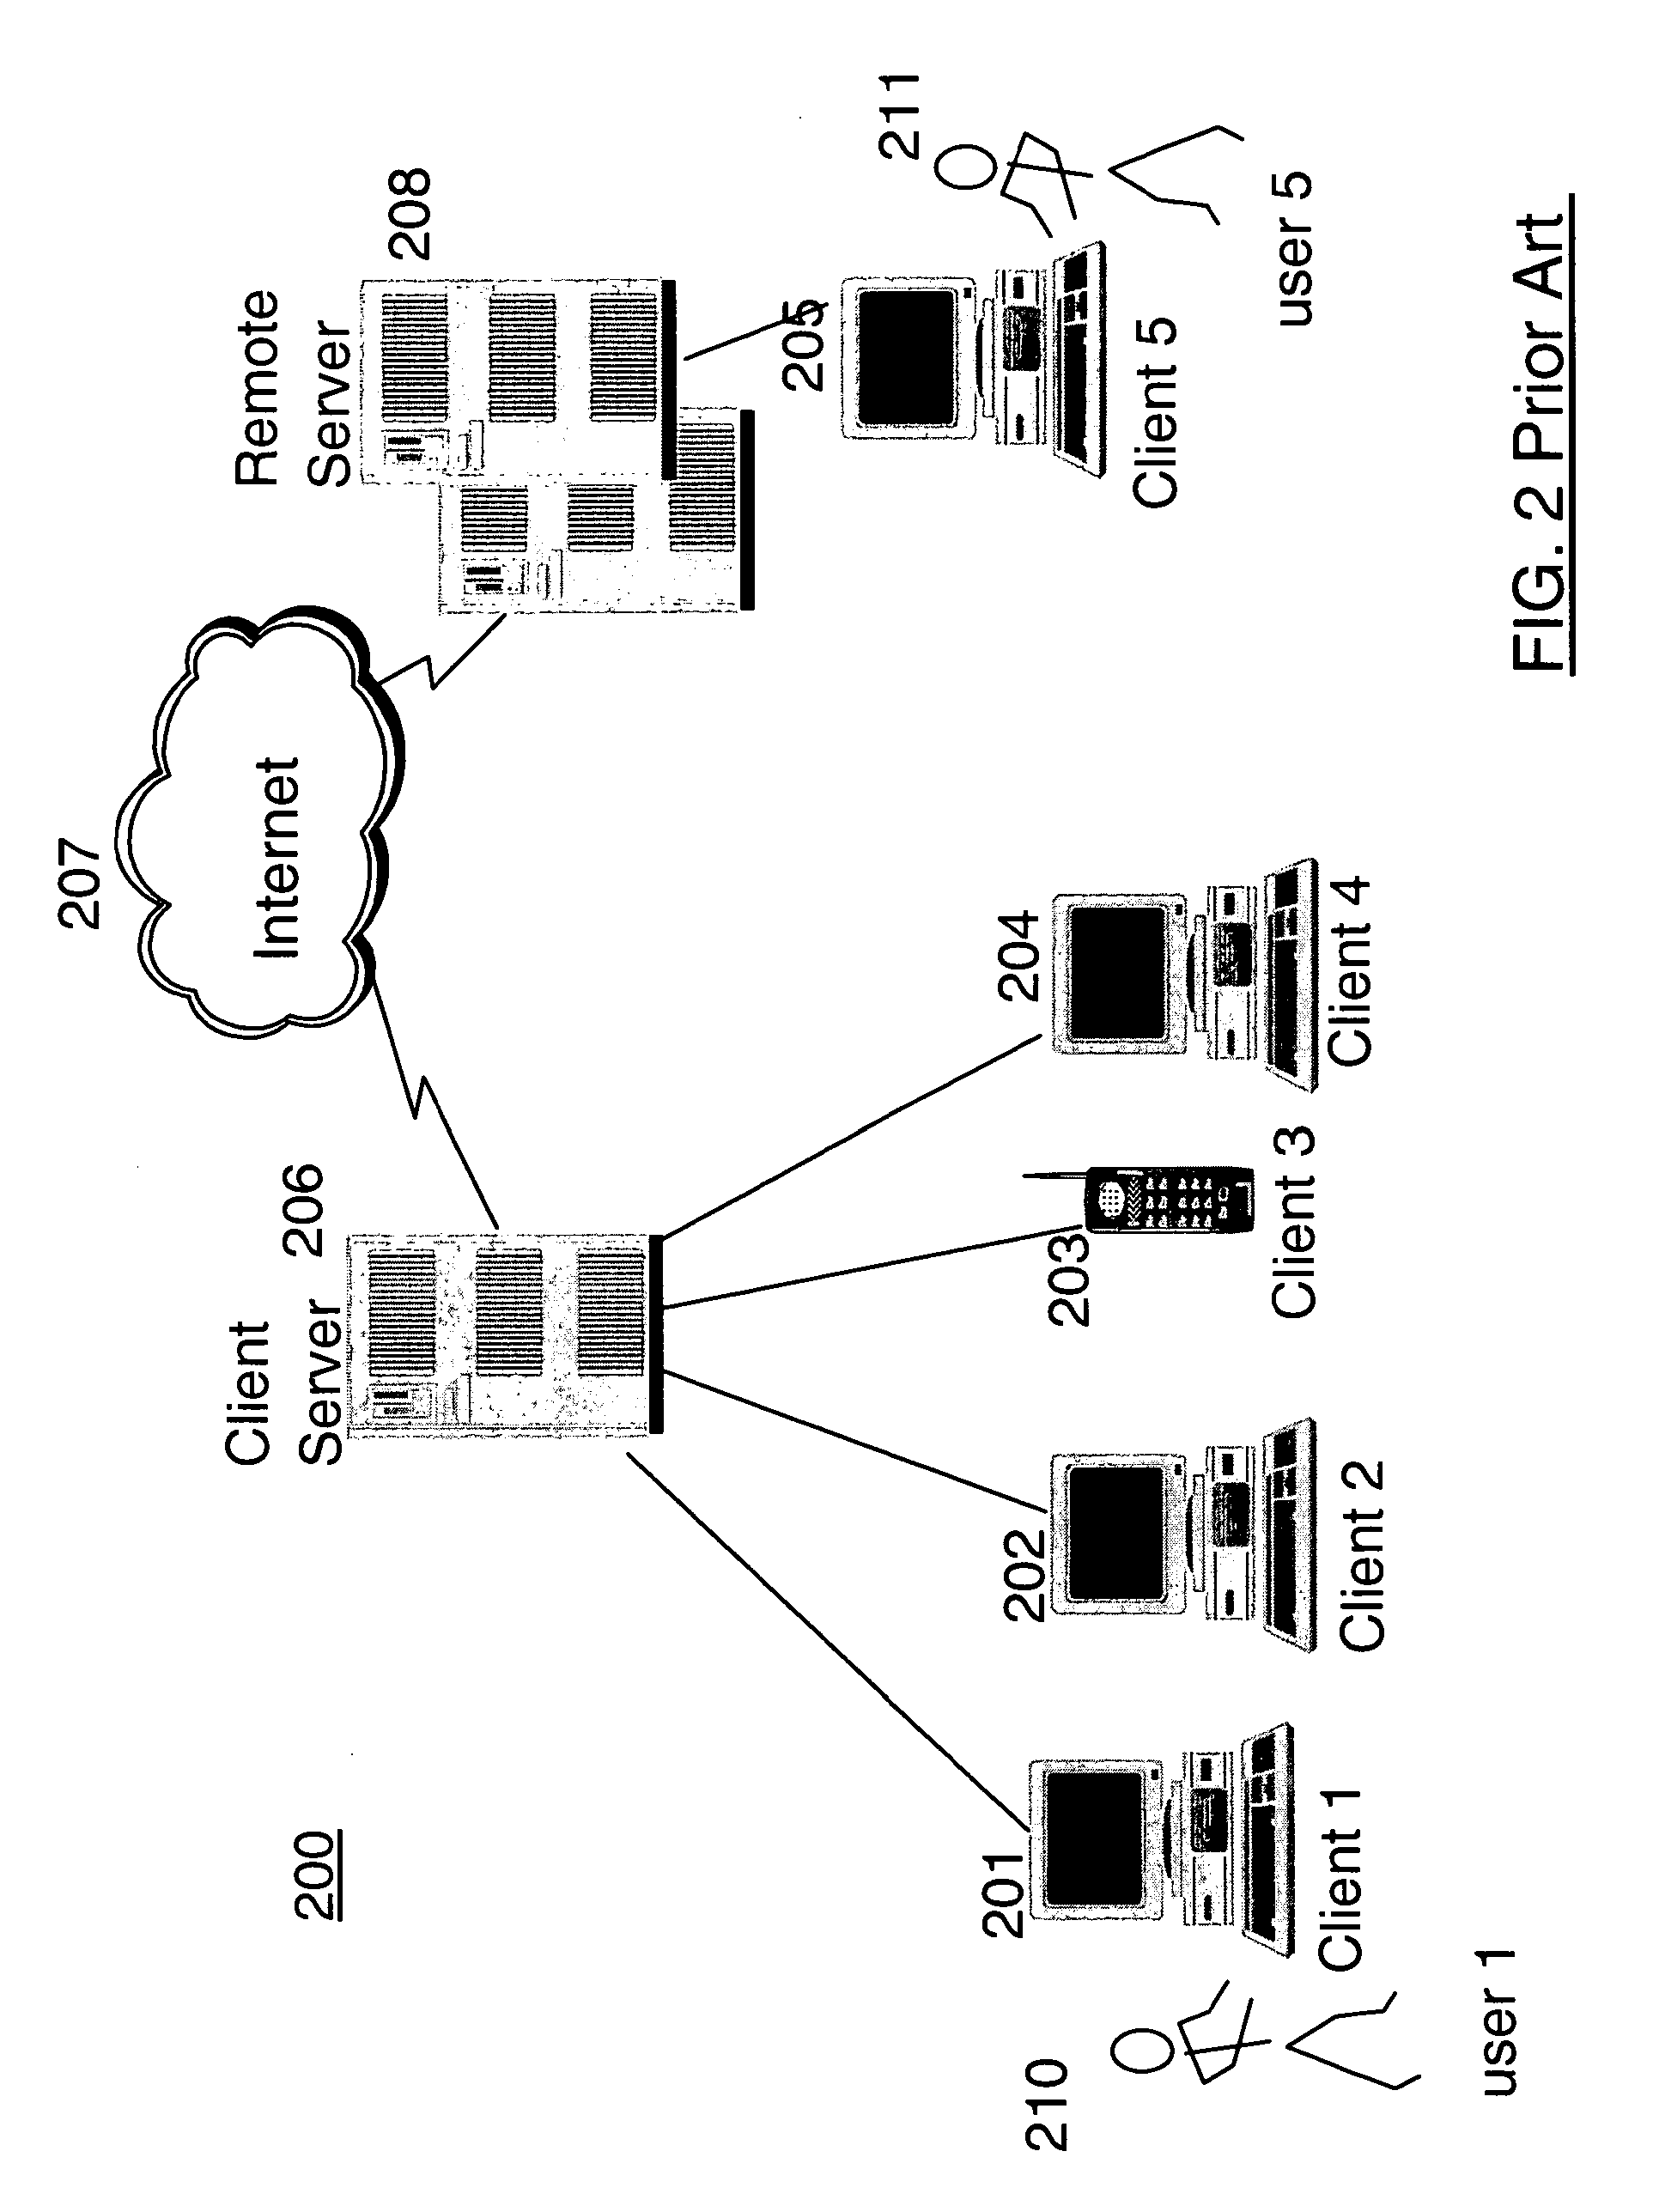 Mirroring System Memory In Non-Volatile Random Access Memory (NVRAM) For Fast Power On/Off Cycling